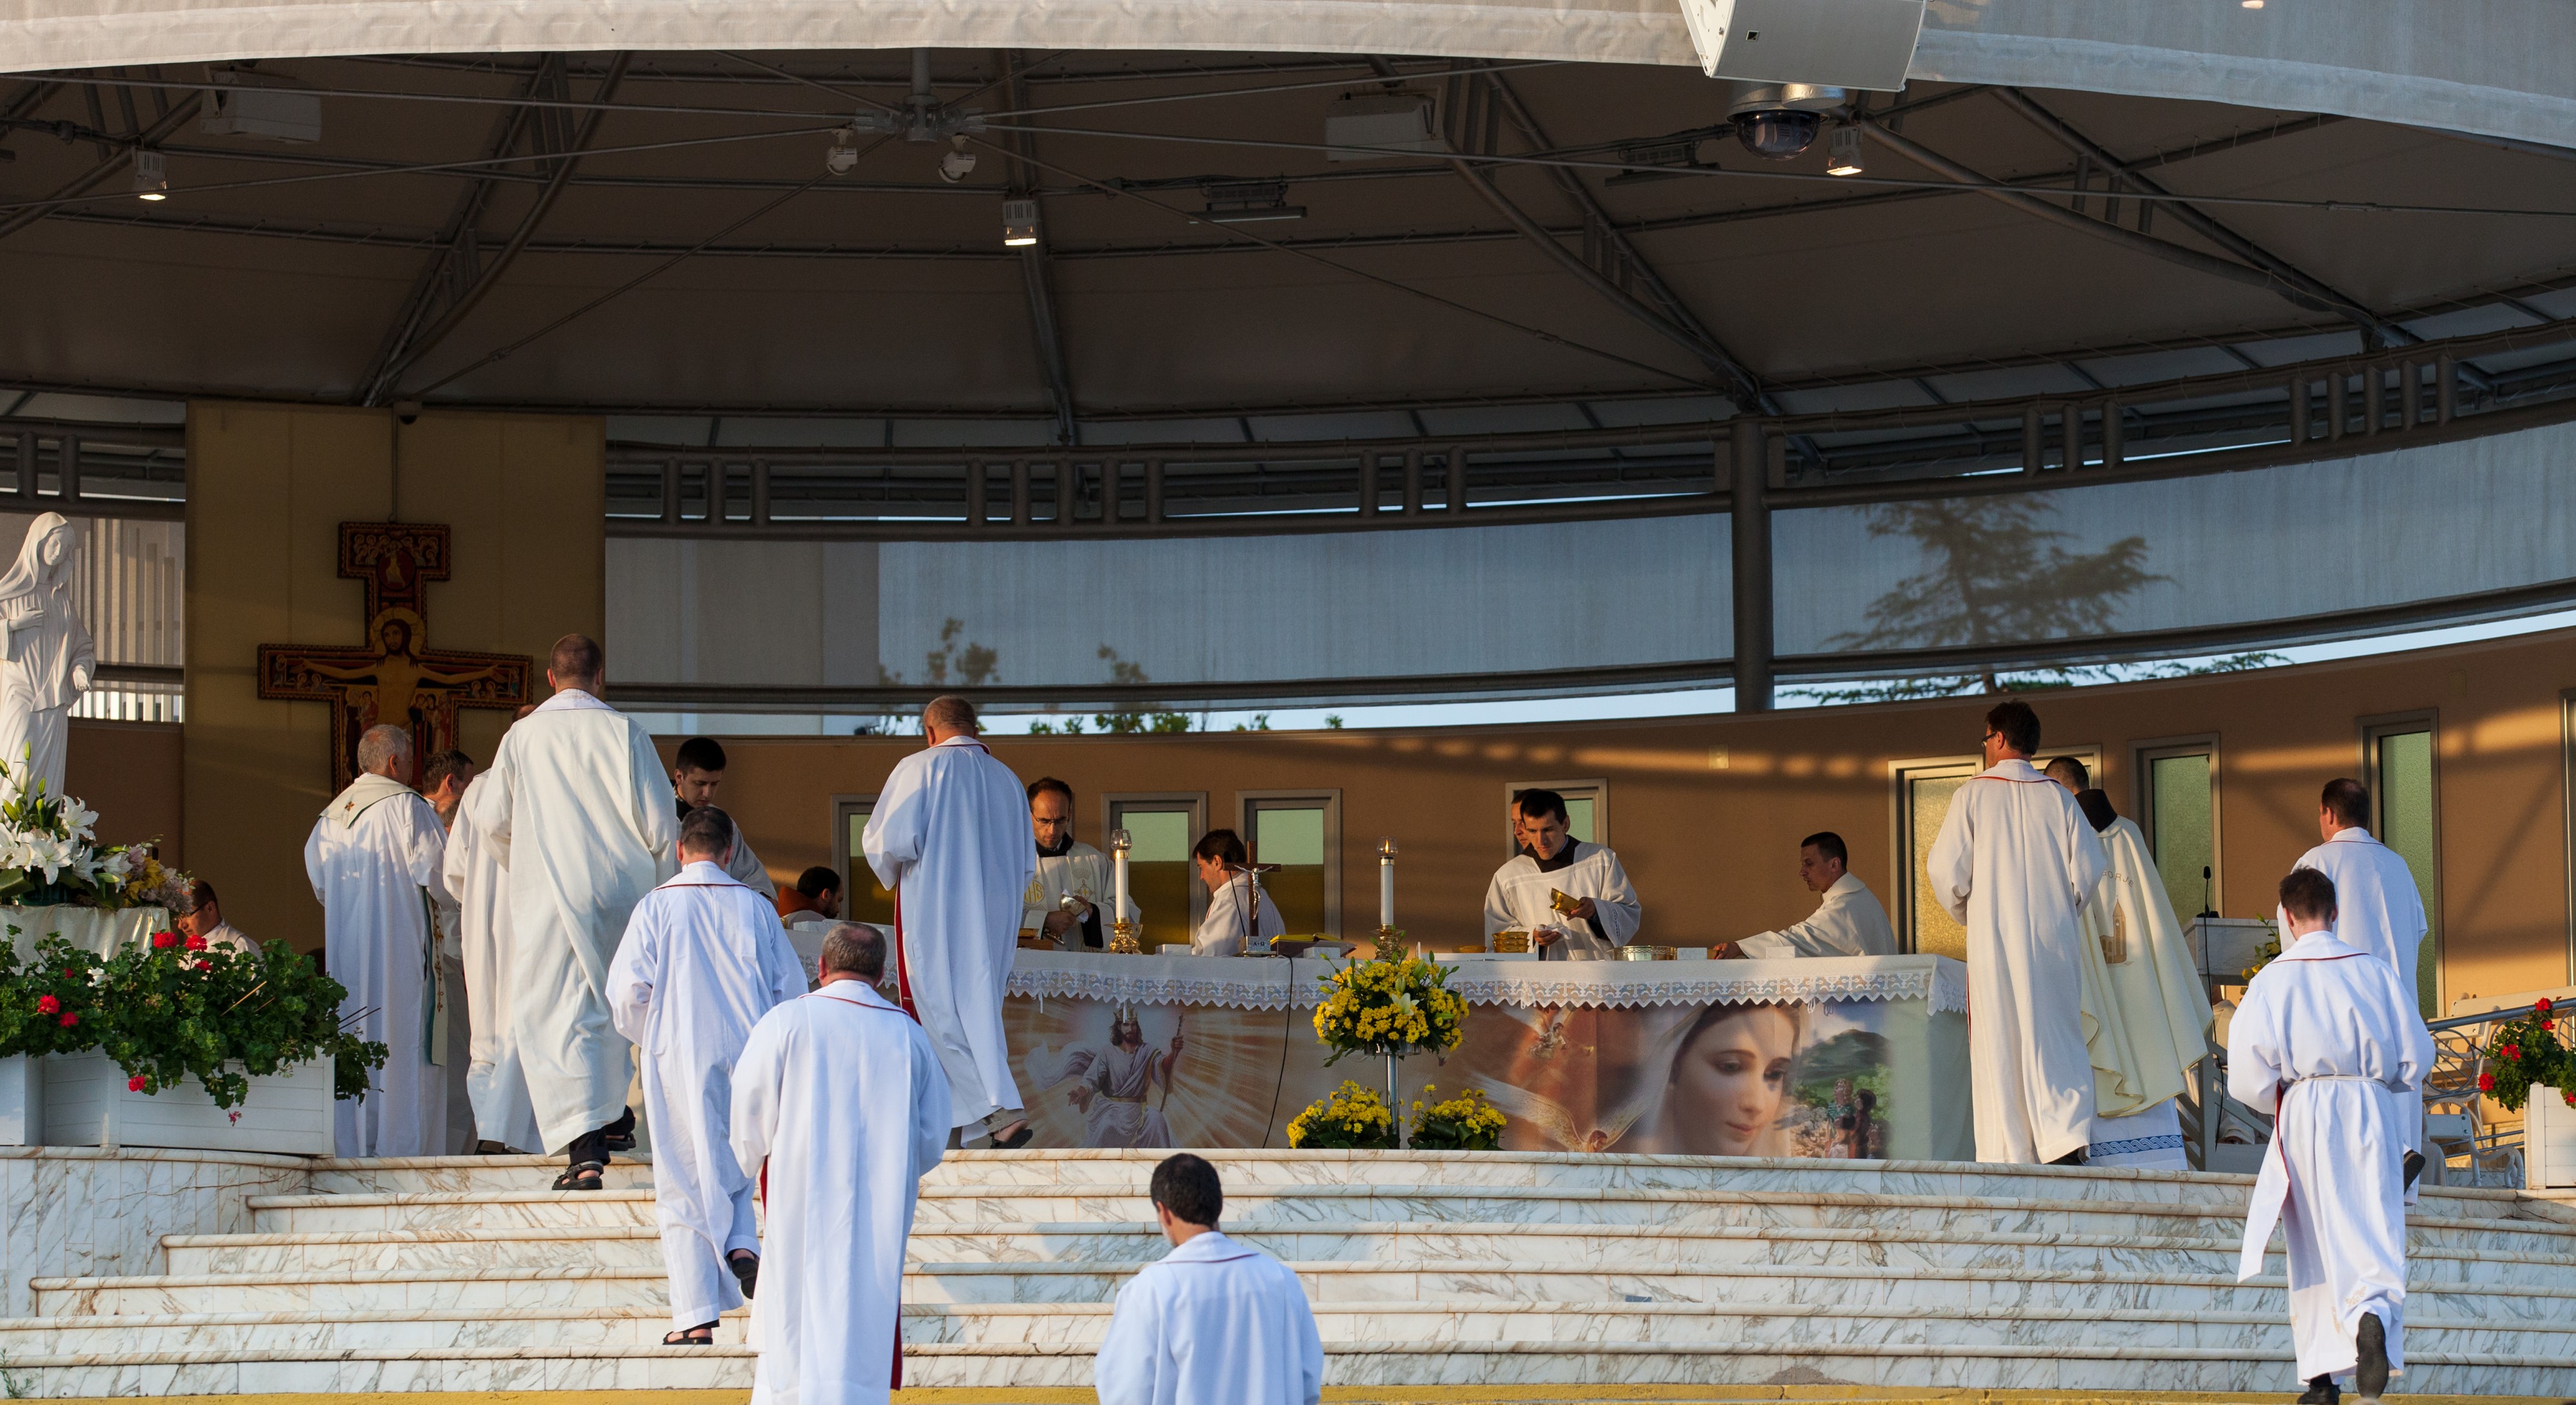 priests in Medjugorje, Bosnia, July 2014, picture 14